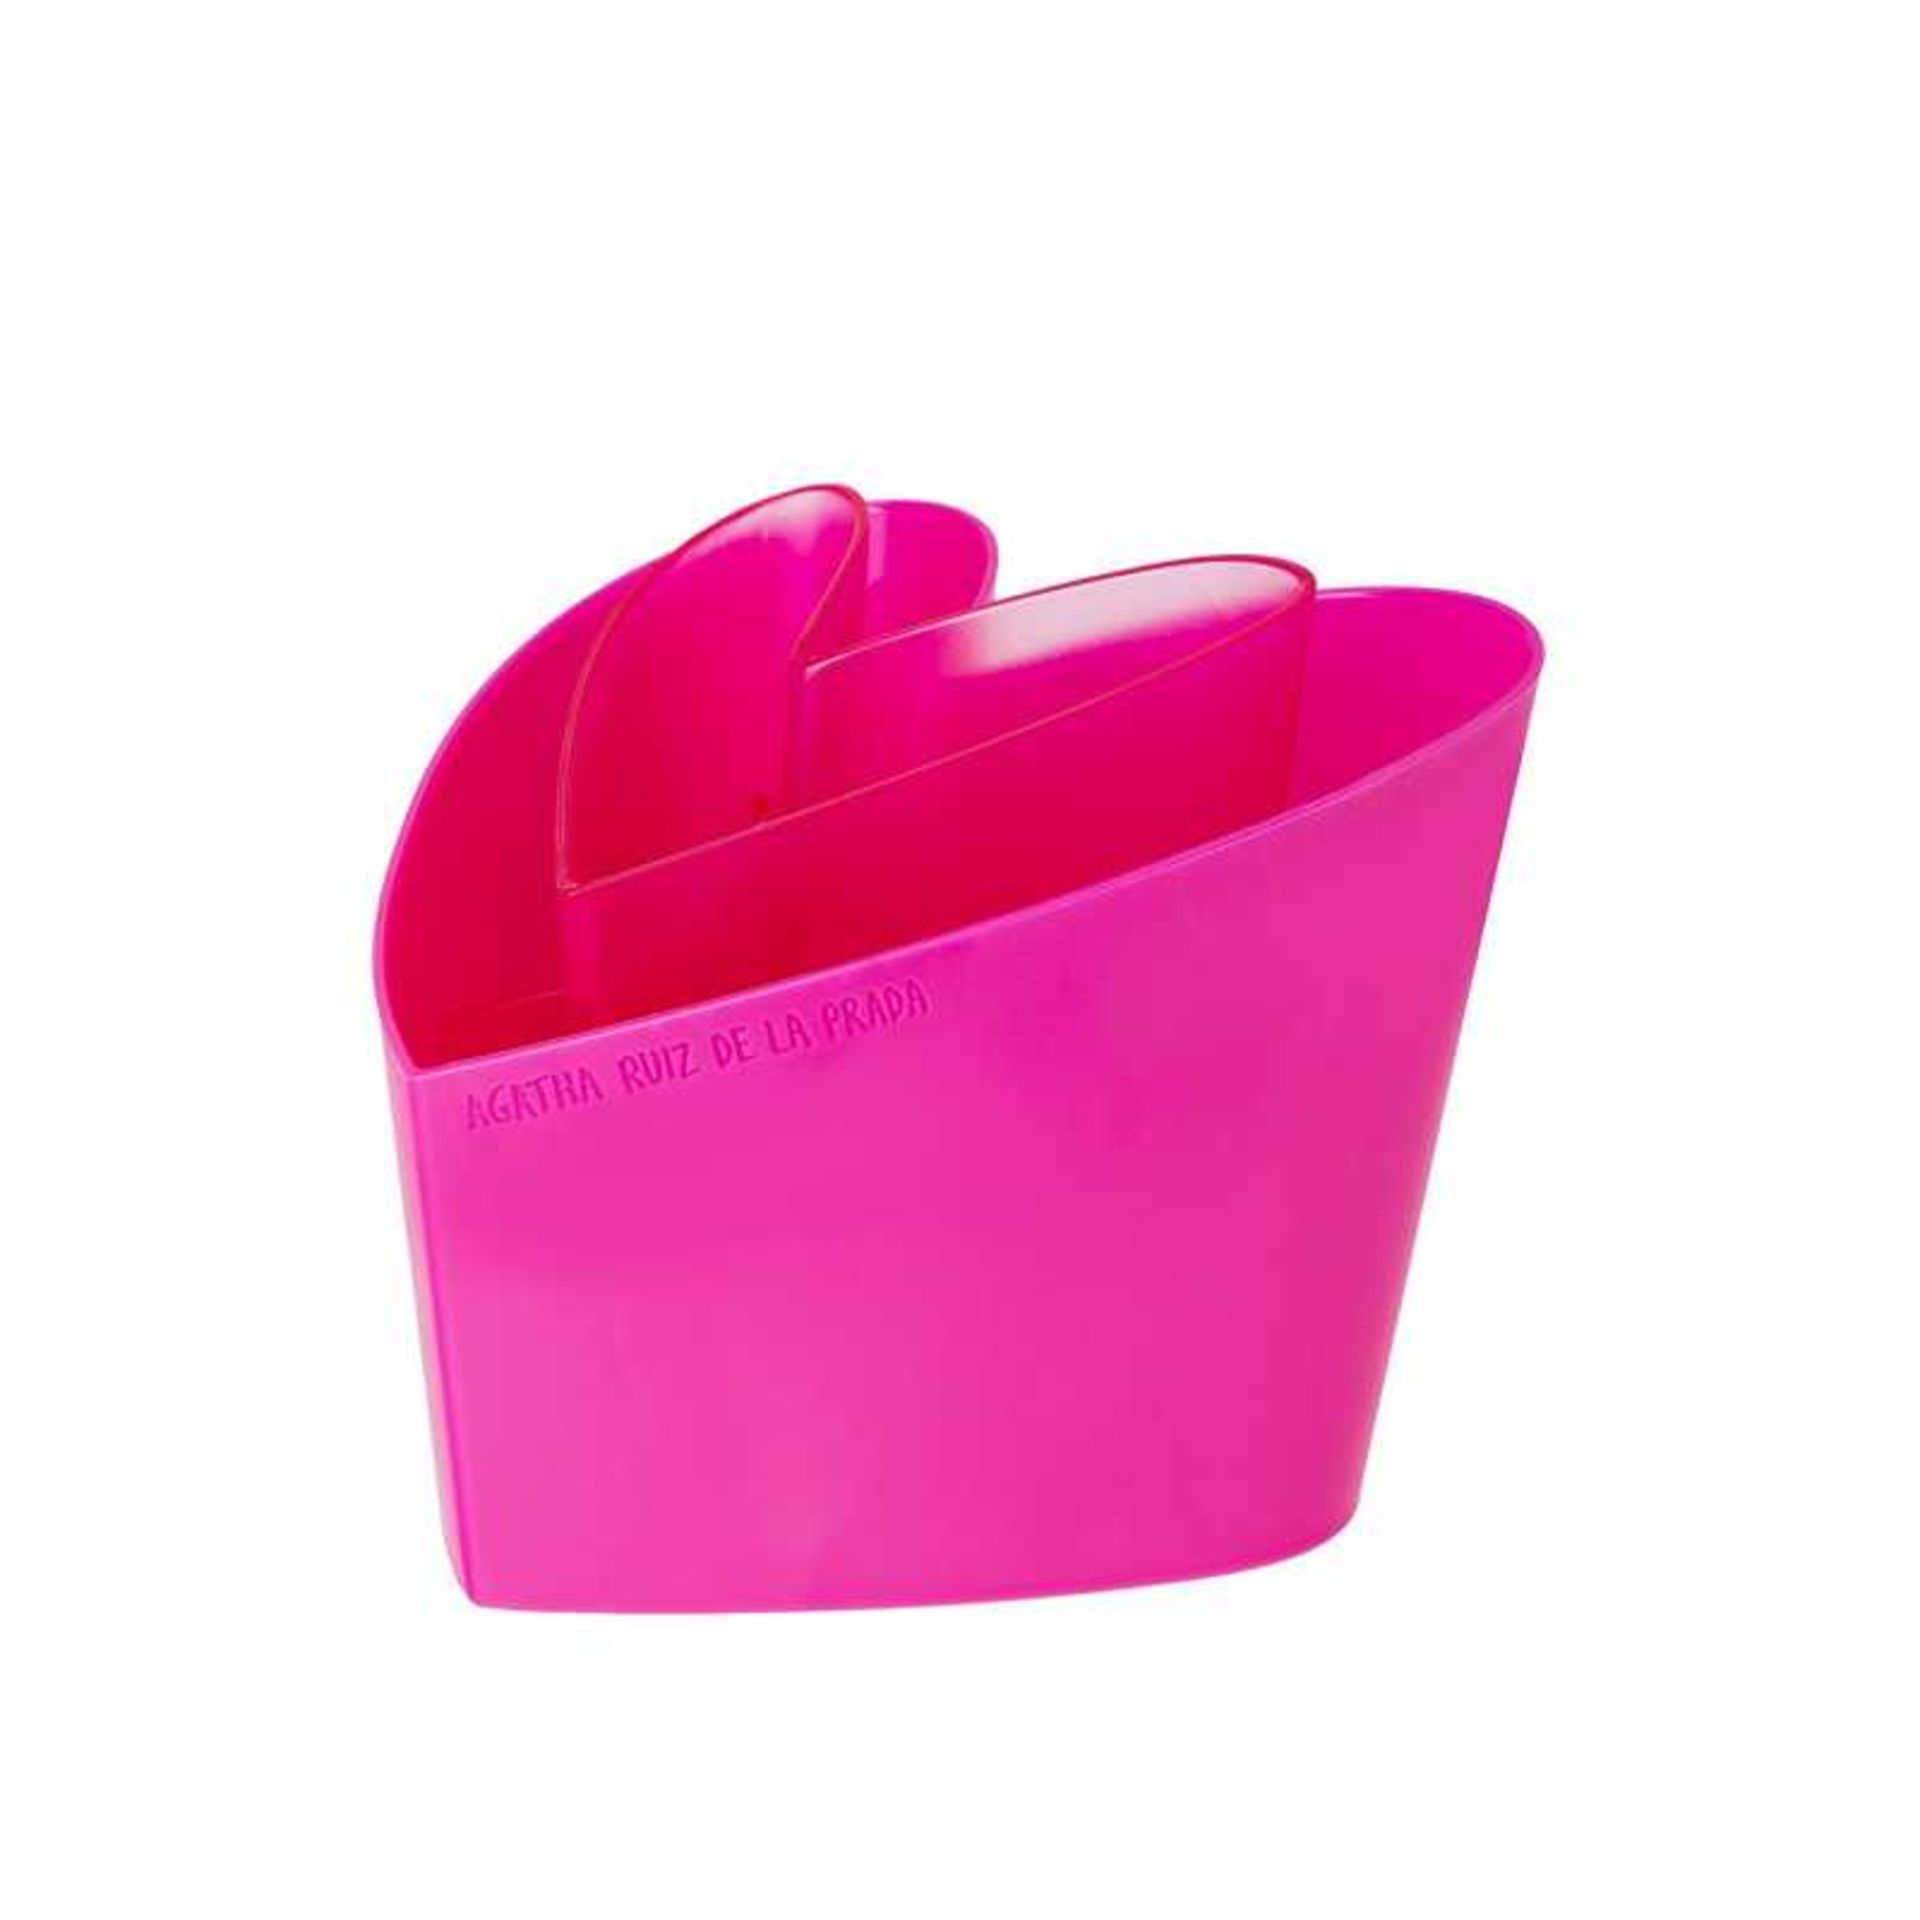 Joblot X 12 Pink Brand New Original Heart-Shaped Cutlery Drainer With Removable Inner Basket - Image 2 of 2